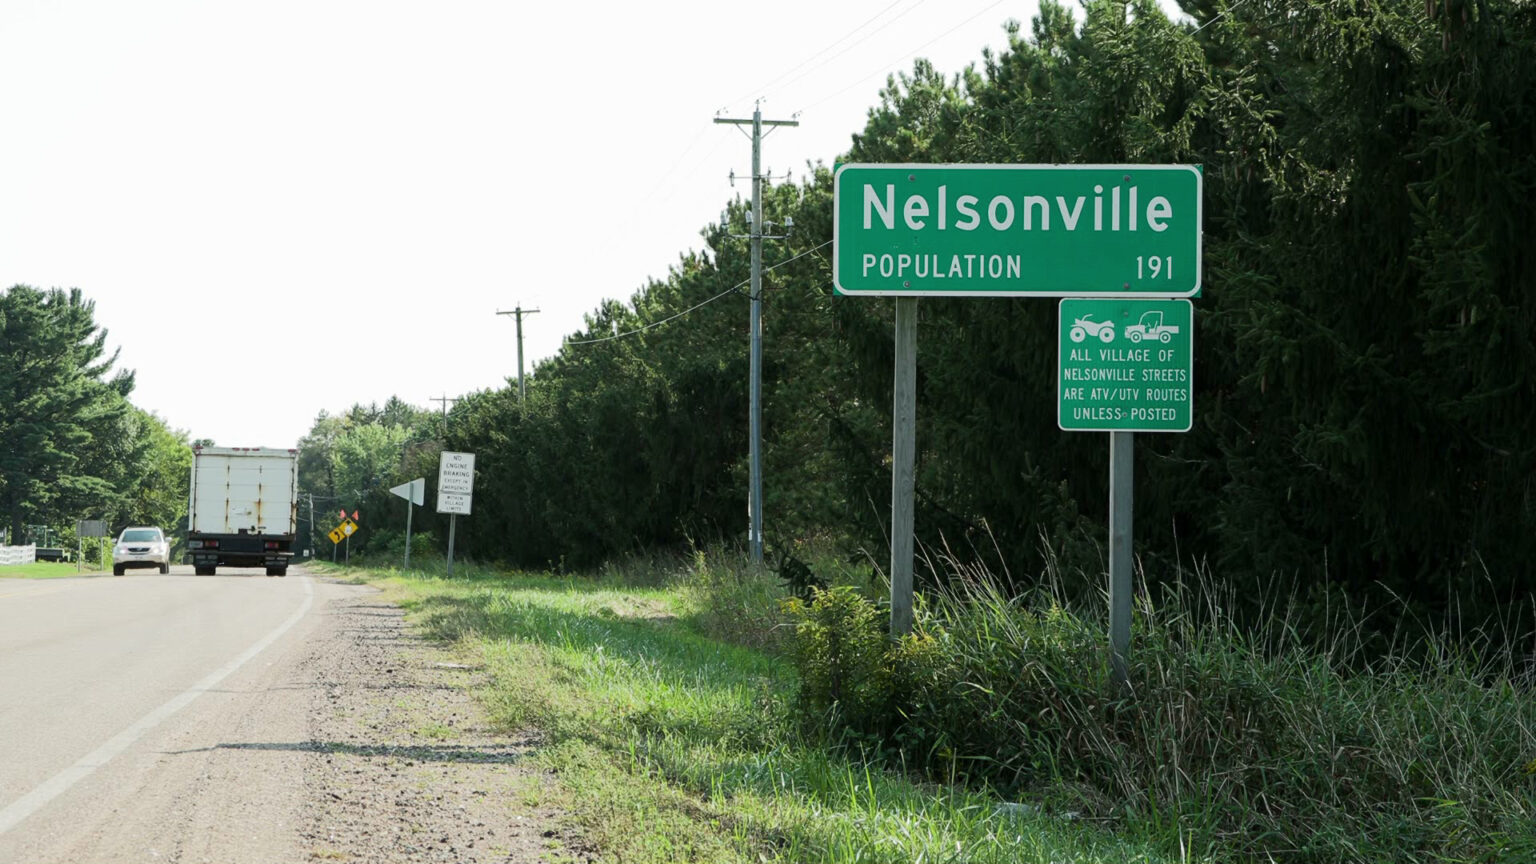 A roadside sign reading Nelsonville Population 191 stands alongside a road next to another sign addressing ATV/UTV traffic, with multiple vehicles, trees and powerlines in the background.